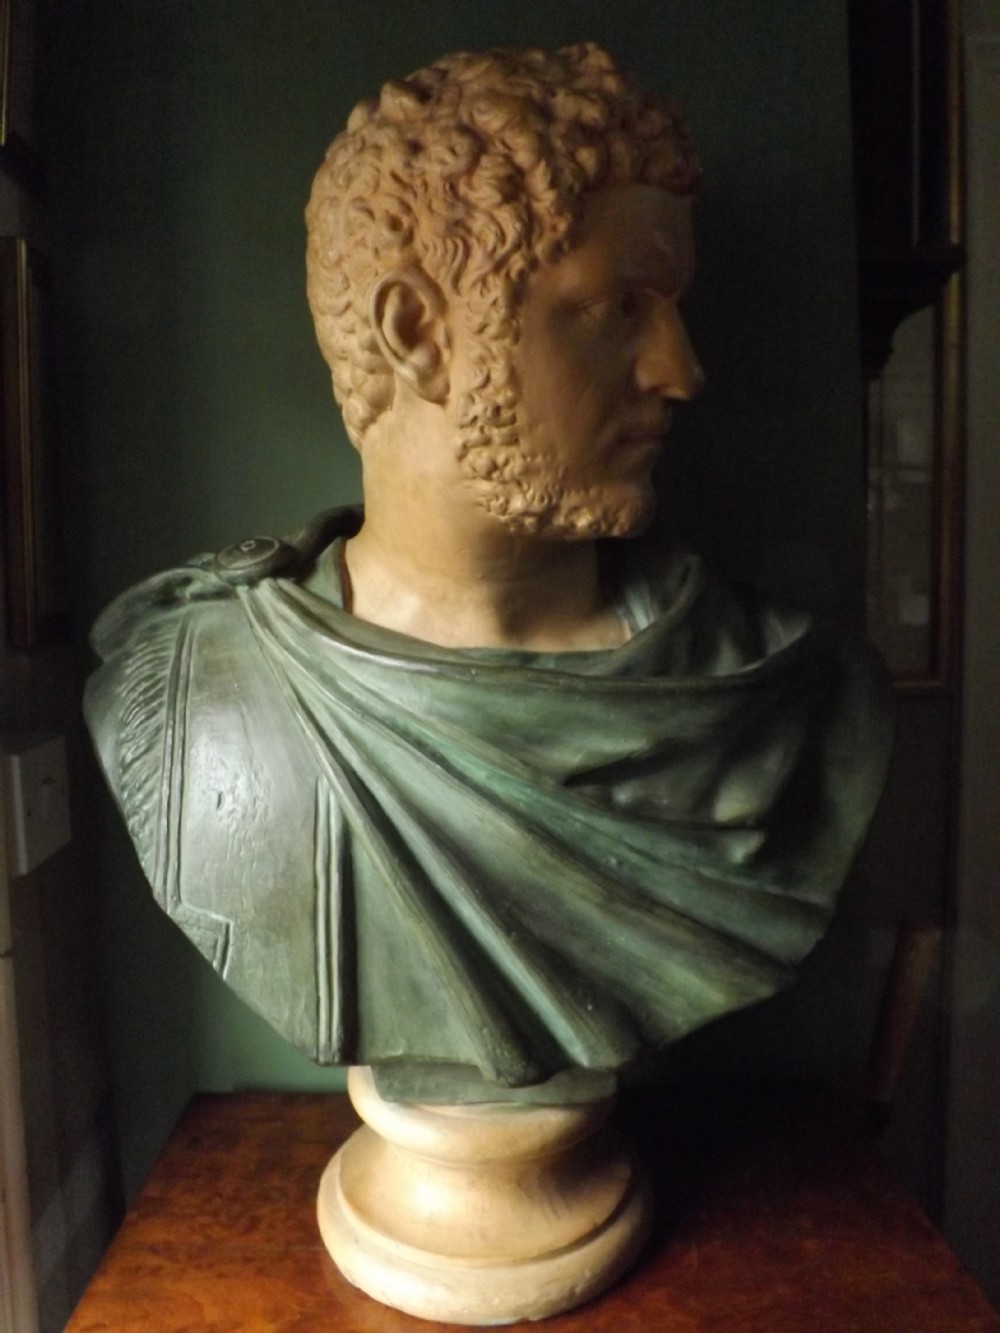 late c19th terracotta library bust study of the infamous roman emperor caracalla